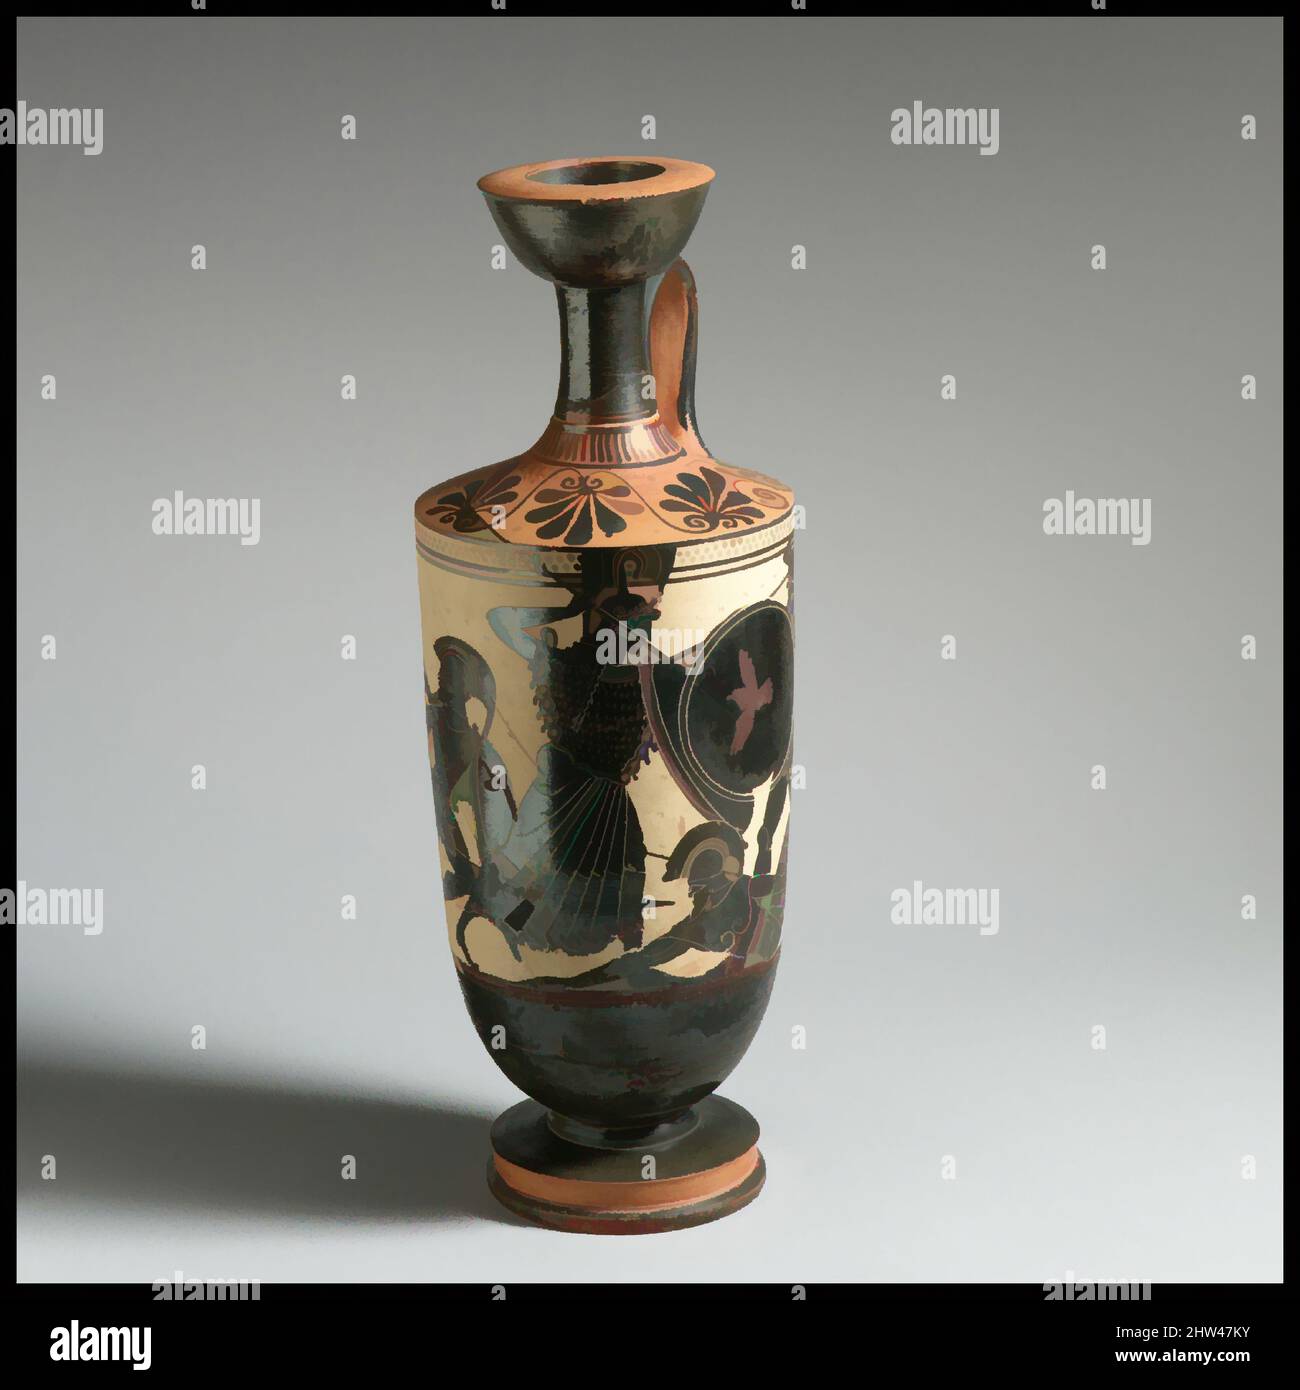 Art inspired by Terracotta lekythos (oil flask), Archaic, 1st quarter of 5th century B.C., Greek, Attic, Terracotta; black-figure, white-ground, H. 6 3/4 in. (17.1 cm), Vases, Gigantomachy (battle of the gods and giants), with Hermes and Athena. In Athens, vases of this type were, Classic works modernized by Artotop with a splash of modernity. Shapes, color and value, eye-catching visual impact on art. Emotions through freedom of artworks in a contemporary way. A timeless message pursuing a wildly creative new direction. Artists turning to the digital medium and creating the Artotop NFT Stock Photo